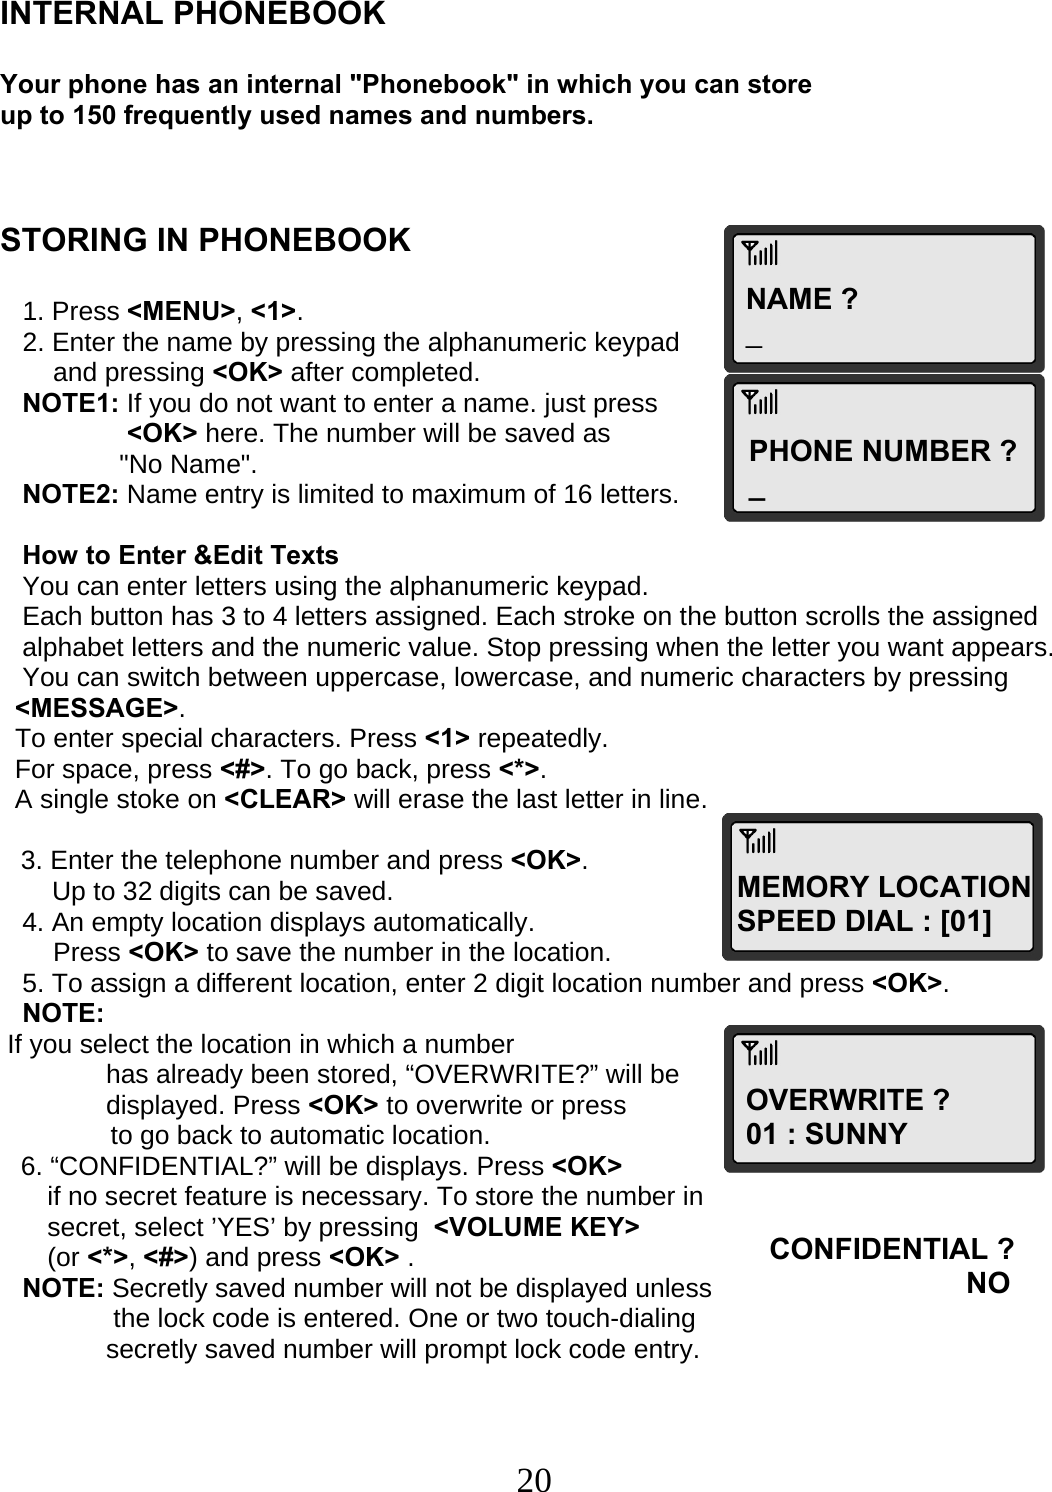  20NAME ? _PHONE NUMBER ? _ MEMORY LOCATION SPEED DIAL : [01]OVERWRITE ? 01 : SUNNY CONFIDENTIAL ?                        NO   INTERNAL PHONEBOOK  Your phone has an internal &quot;Phonebook&quot; in which you can store up to 150 frequently used names and numbers.    STORING IN PHONEBOOK     1. Press &lt;MENU&gt;, &lt;1&gt;.    2. Enter the name by pressing the alphanumeric keypad   and pressing &lt;OK&gt; after completed.    NOTE1: If you do not want to enter a name. just press  &lt;OK&gt; here. The number will be saved as  &quot;No Name&quot;.     NOTE2: Name entry is limited to maximum of 16 letters.     How to Enter &amp;Edit Texts    You can enter letters using the alphanumeric keypad.    Each button has 3 to 4 letters assigned. Each stroke on the button scrolls the assigned     alphabet letters and the numeric value. Stop pressing when the letter you want appears.    You can switch between uppercase, lowercase, and numeric characters by pressing    &lt;MESSAGE&gt;.   To enter special characters. Press &lt;1&gt; repeatedly.   For space, press &lt;#&gt;. To go back, press &lt;*&gt;.   A single stoke on &lt;CLEAR&gt; will erase the last letter in line.  3. Enter the telephone number and press &lt;OK&gt;.        Up to 32 digits can be saved.    4. An empty location displays automatically.  Press &lt;OK&gt; to save the number in the location.    5. To assign a different location, enter 2 digit location number and press &lt;OK&gt;.    NOTE:  If you select the location in which a number   has already been stored, “OVERWRITE?” will be  displayed. Press &lt;OK&gt; to overwrite or press                 to go back to automatic location. 6. “CONFIDENTIAL?” will be displays. Press &lt;OK&gt;  if no secret feature is necessary. To store the number in  secret, select ’YES’ by pressing  &lt;VOLUME KEY&gt; (or &lt;*&gt;, &lt;#&gt;) and press &lt;OK&gt; .    NOTE: Secretly saved number will not be displayed unless   the lock code is entered. One or two touch-dialing  secretly saved number will prompt lock code entry. 